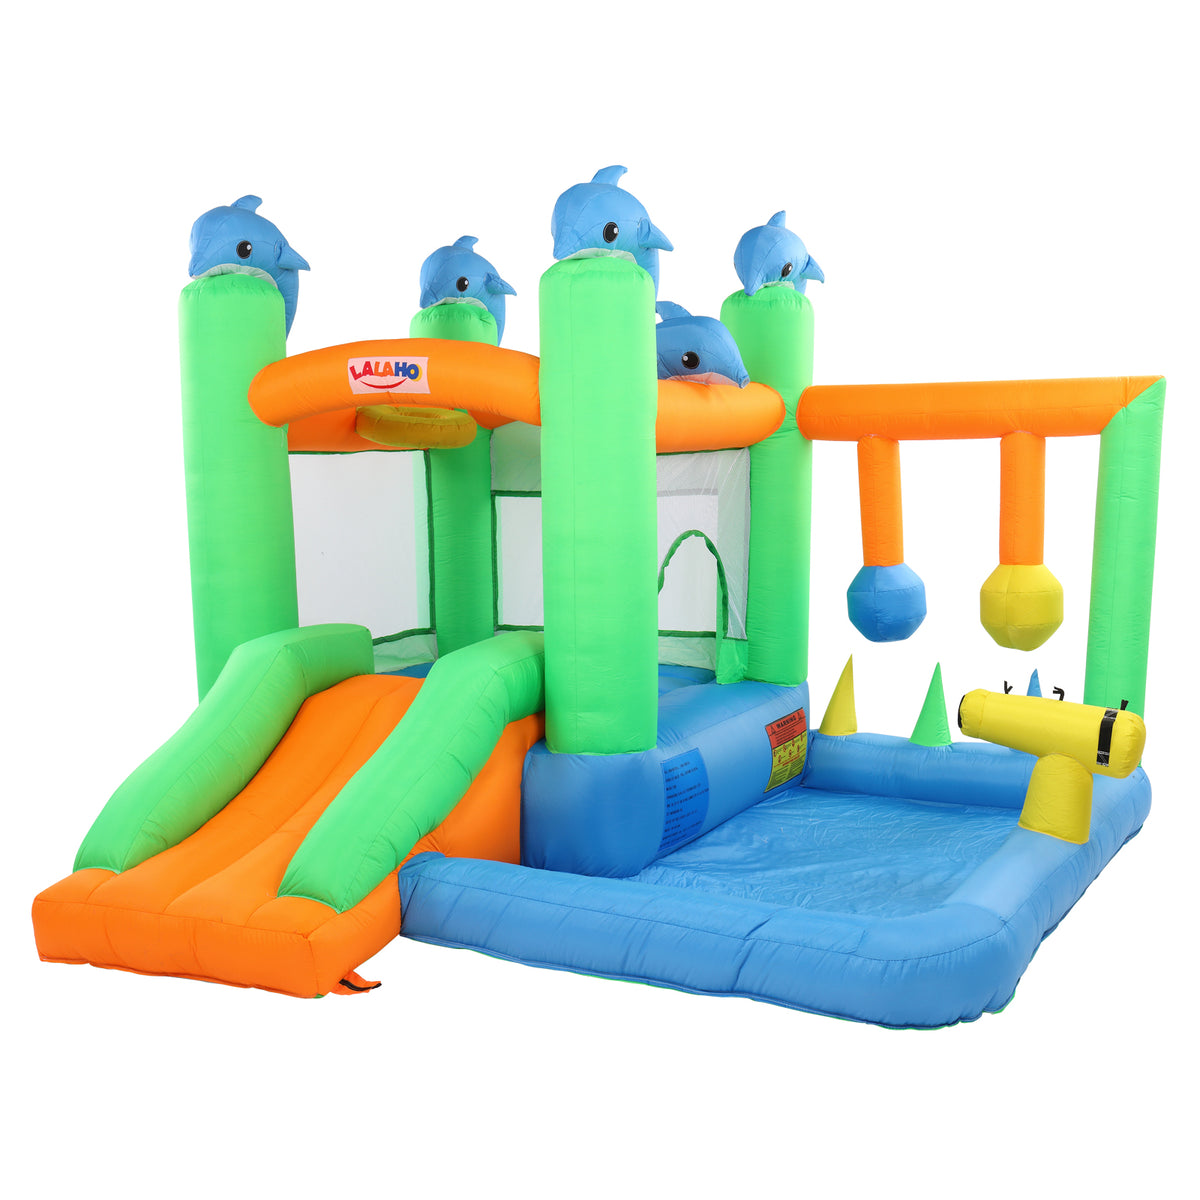 Inflatable Bouncing Castle with Pool, Water Gun and Slide